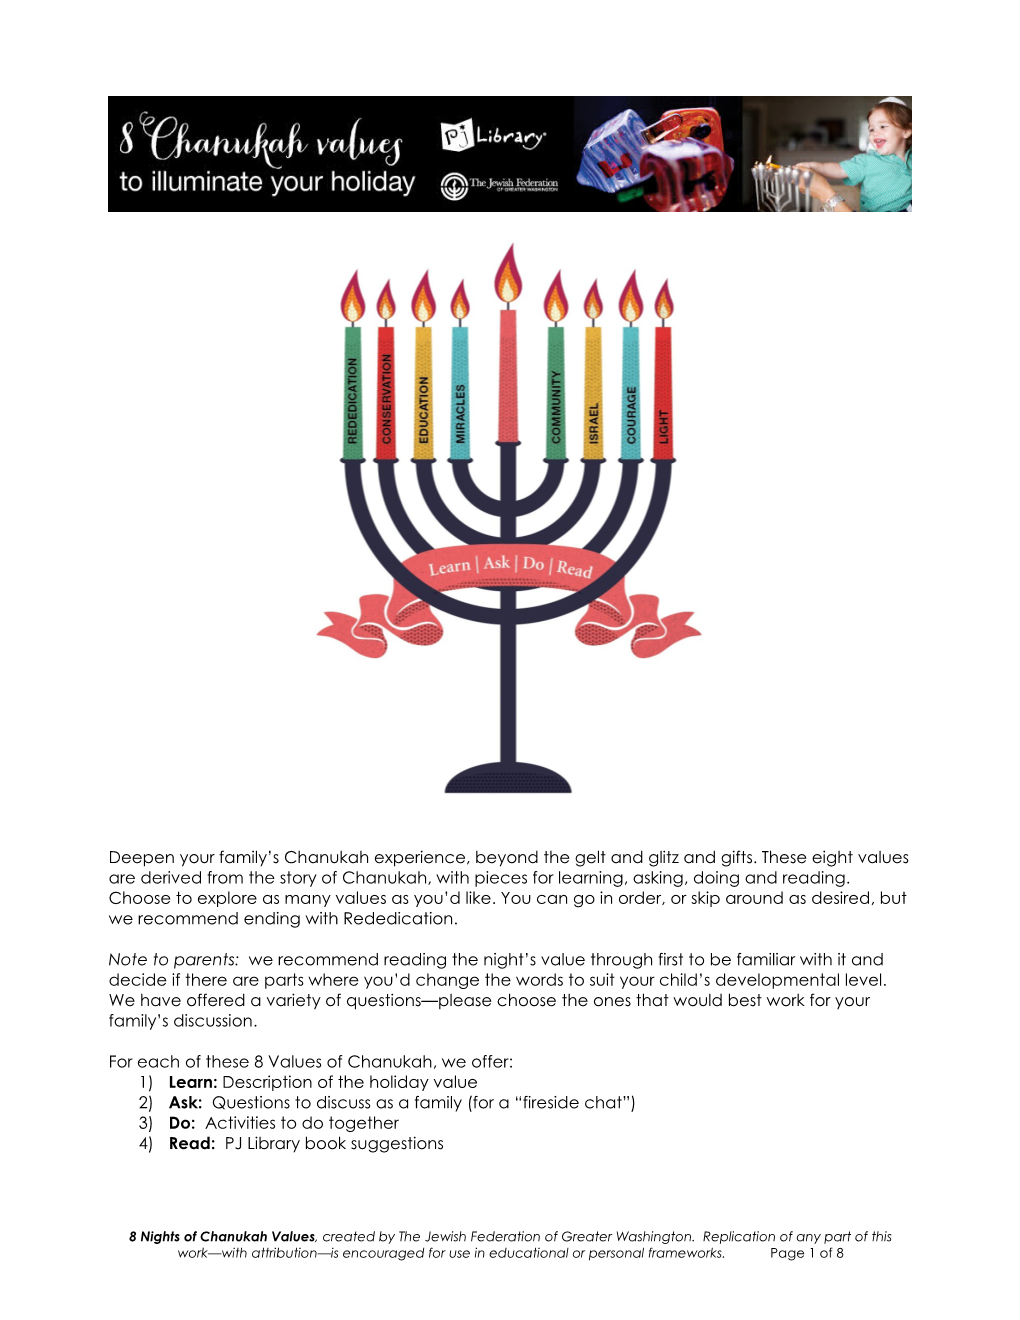 Deepen Your Family's Chanukah Experience, Beyond the Gelt And